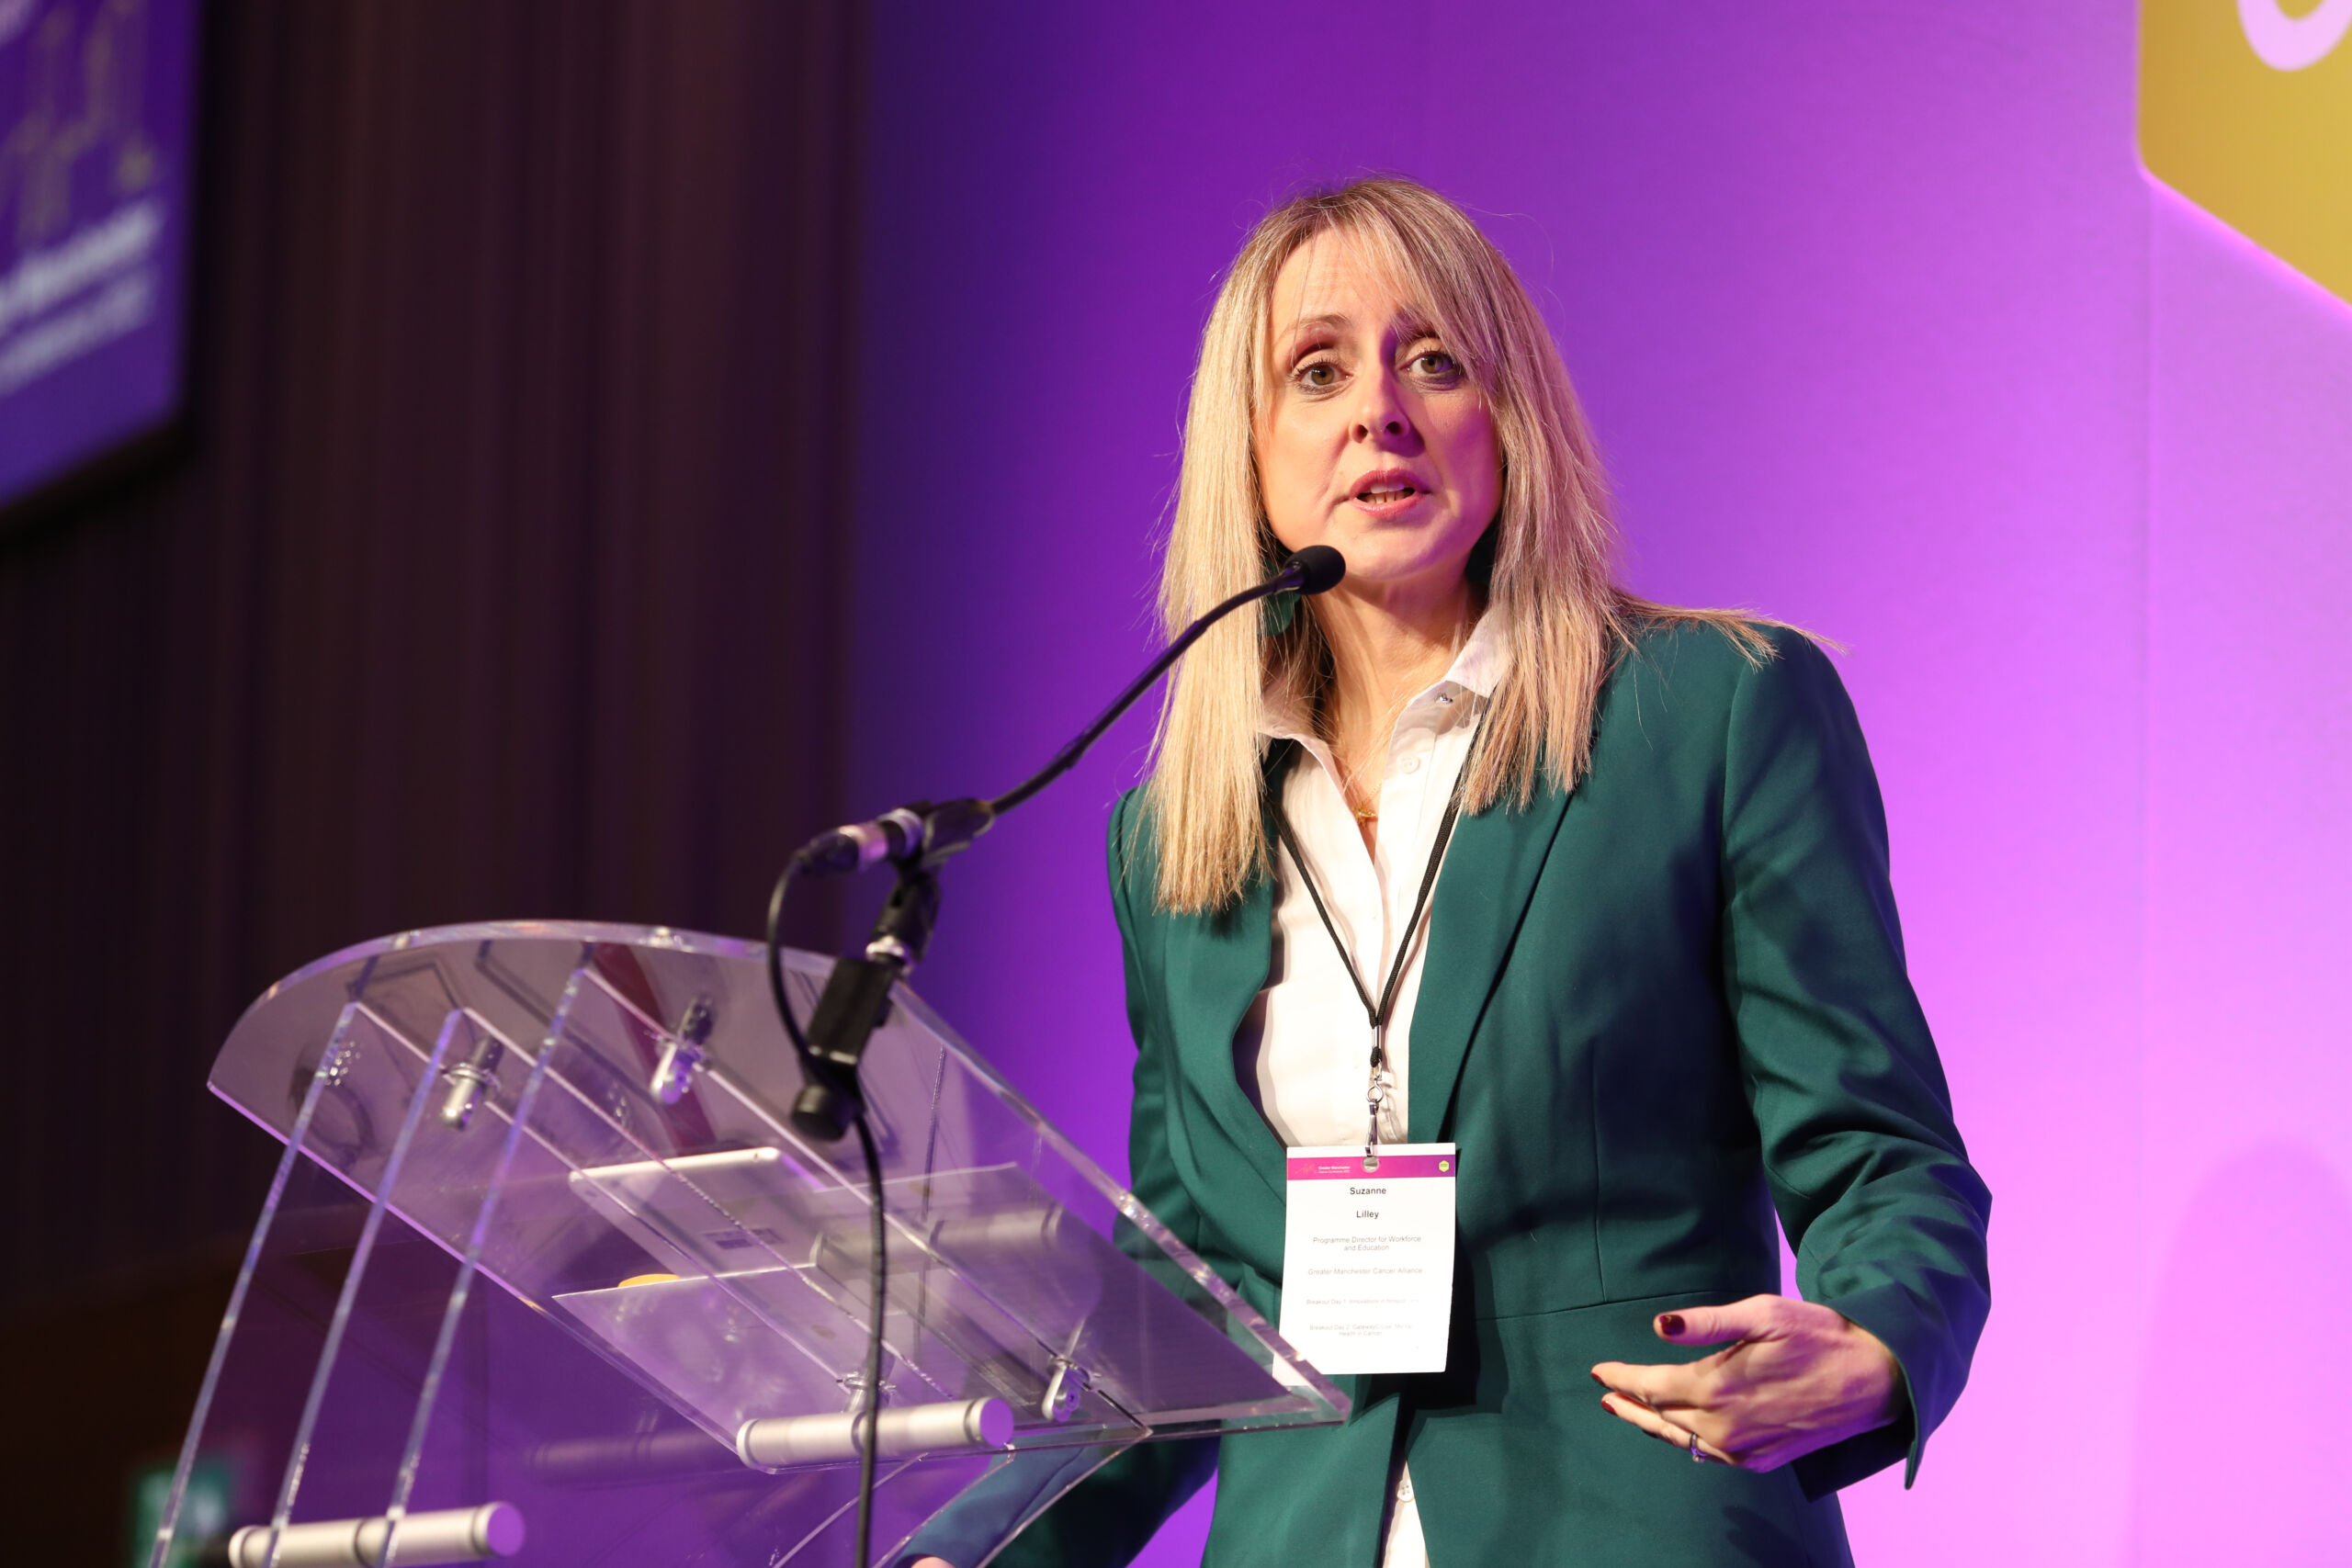 A white woman with blonde hair in a green suit talks at a lectern at Greater Manchester Cancer Conference